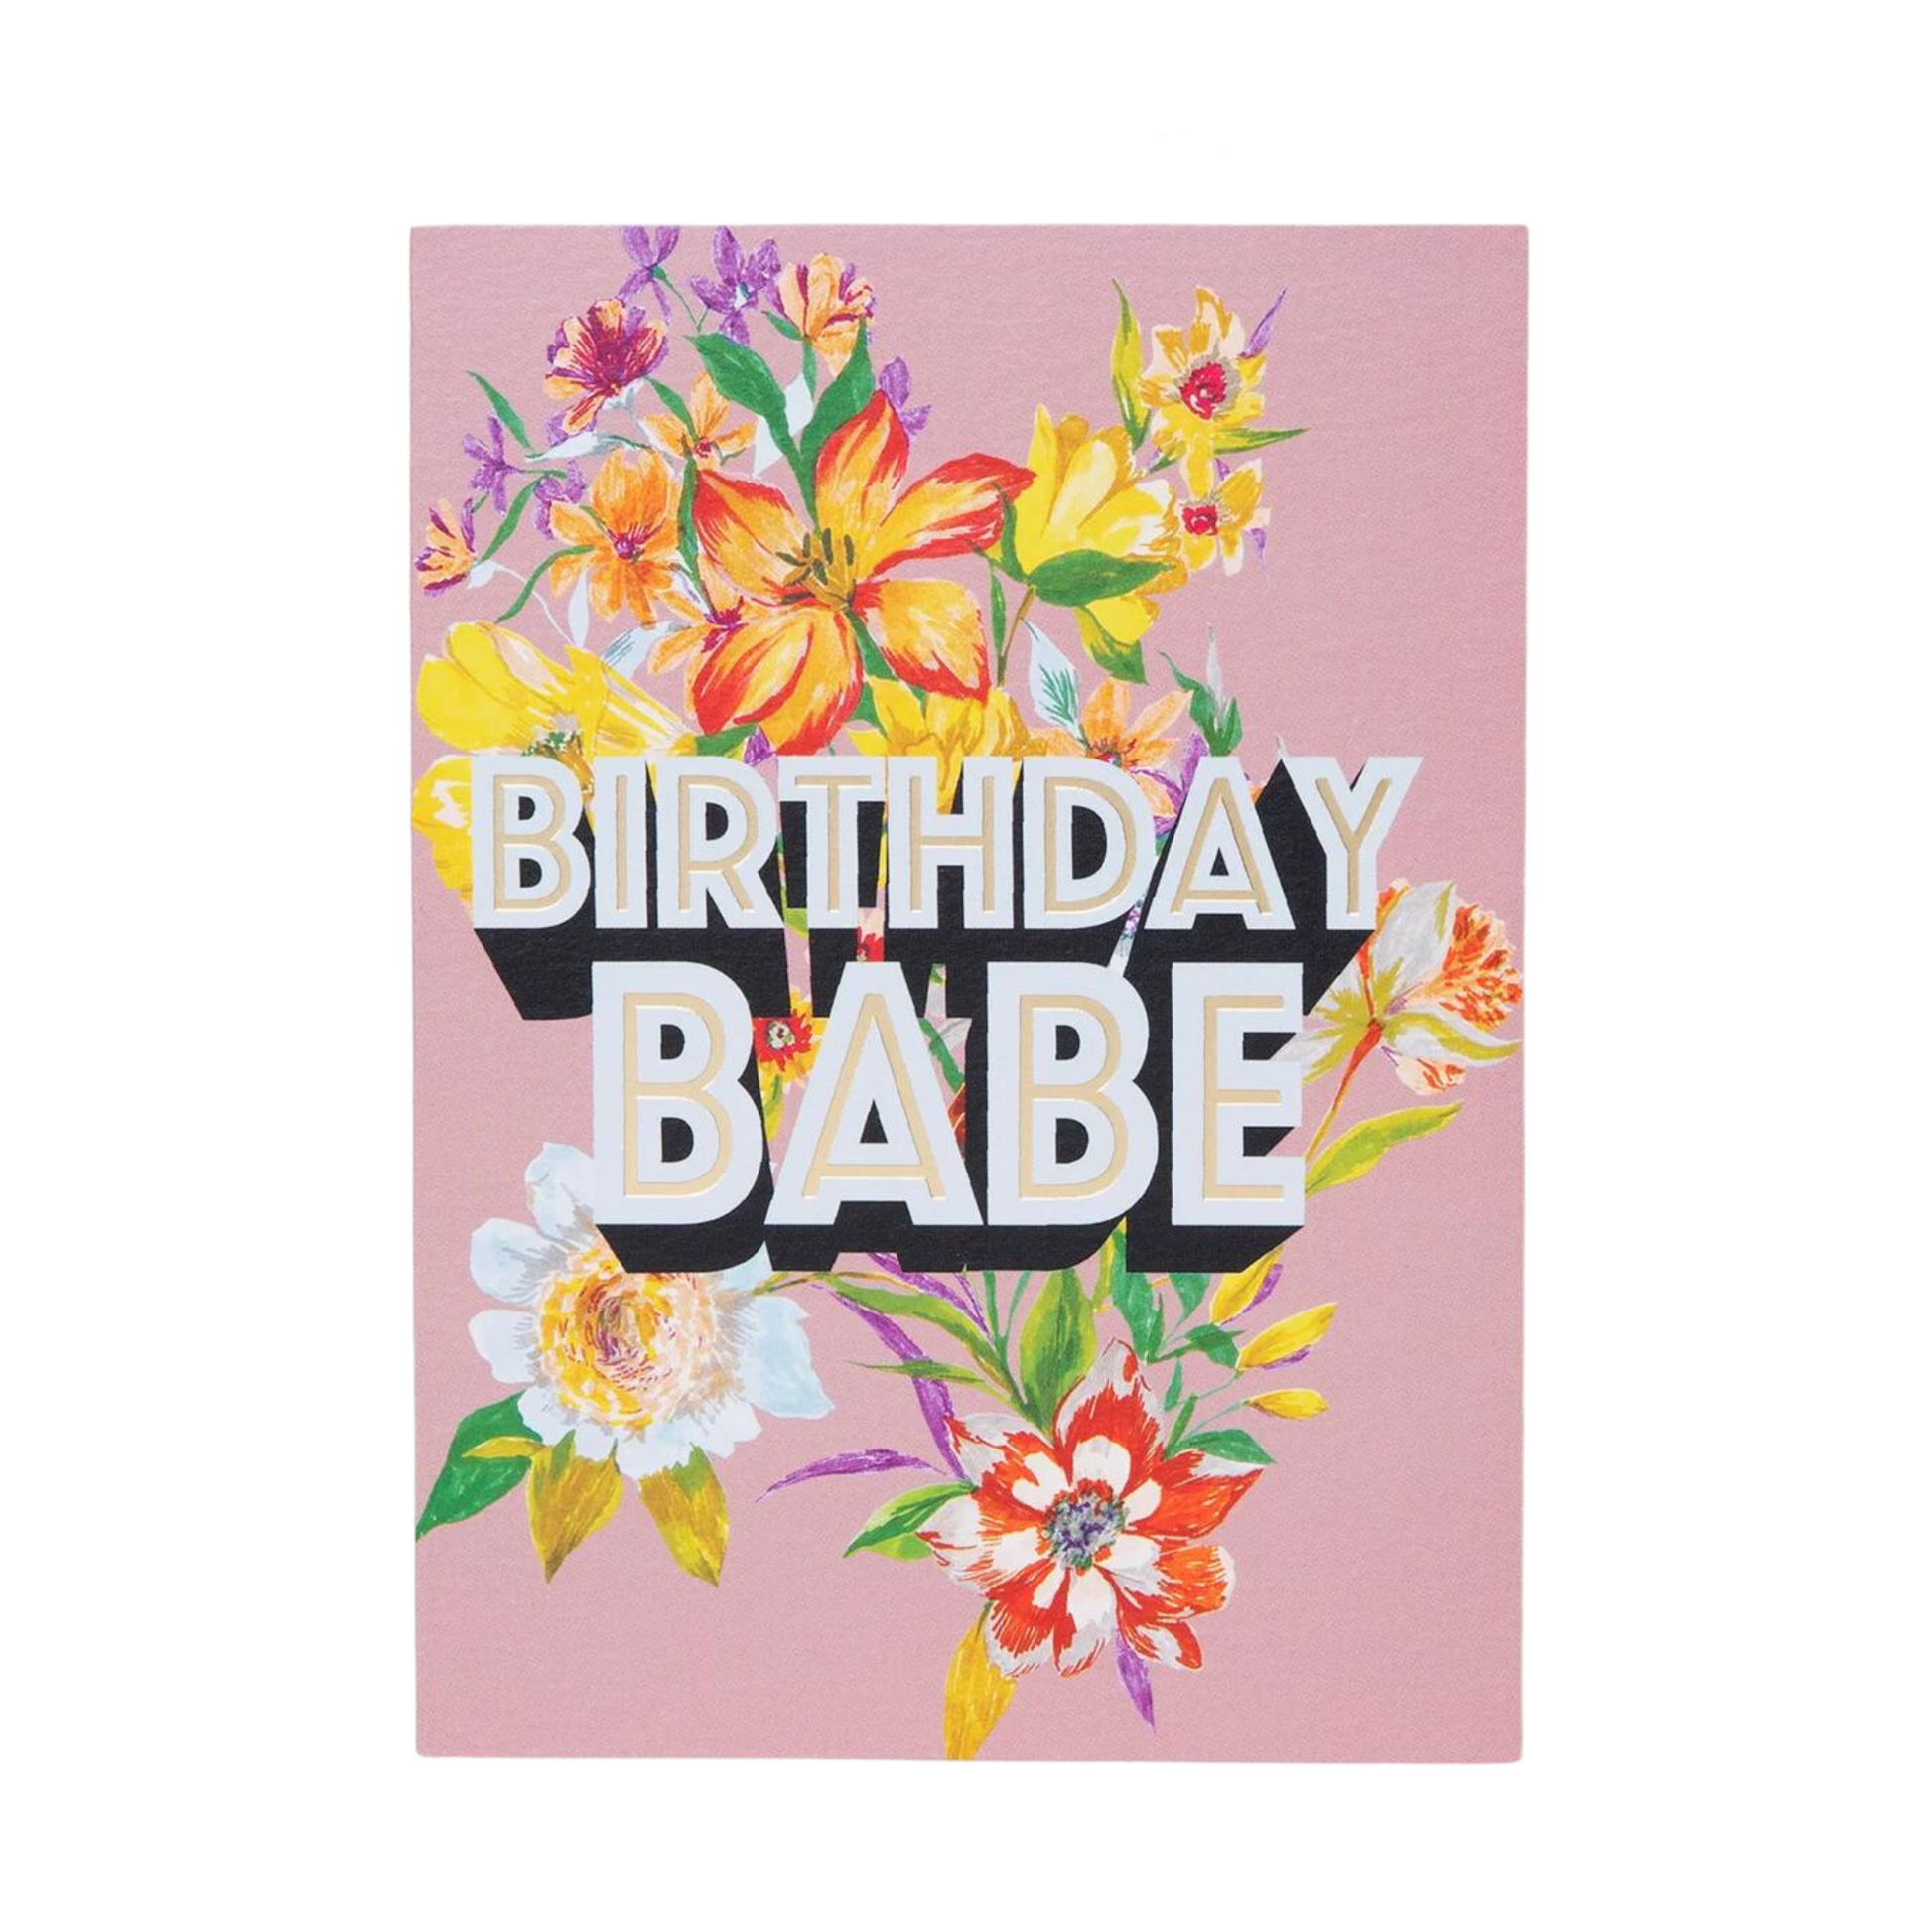 birthday card with birthday babe message and floral illustration